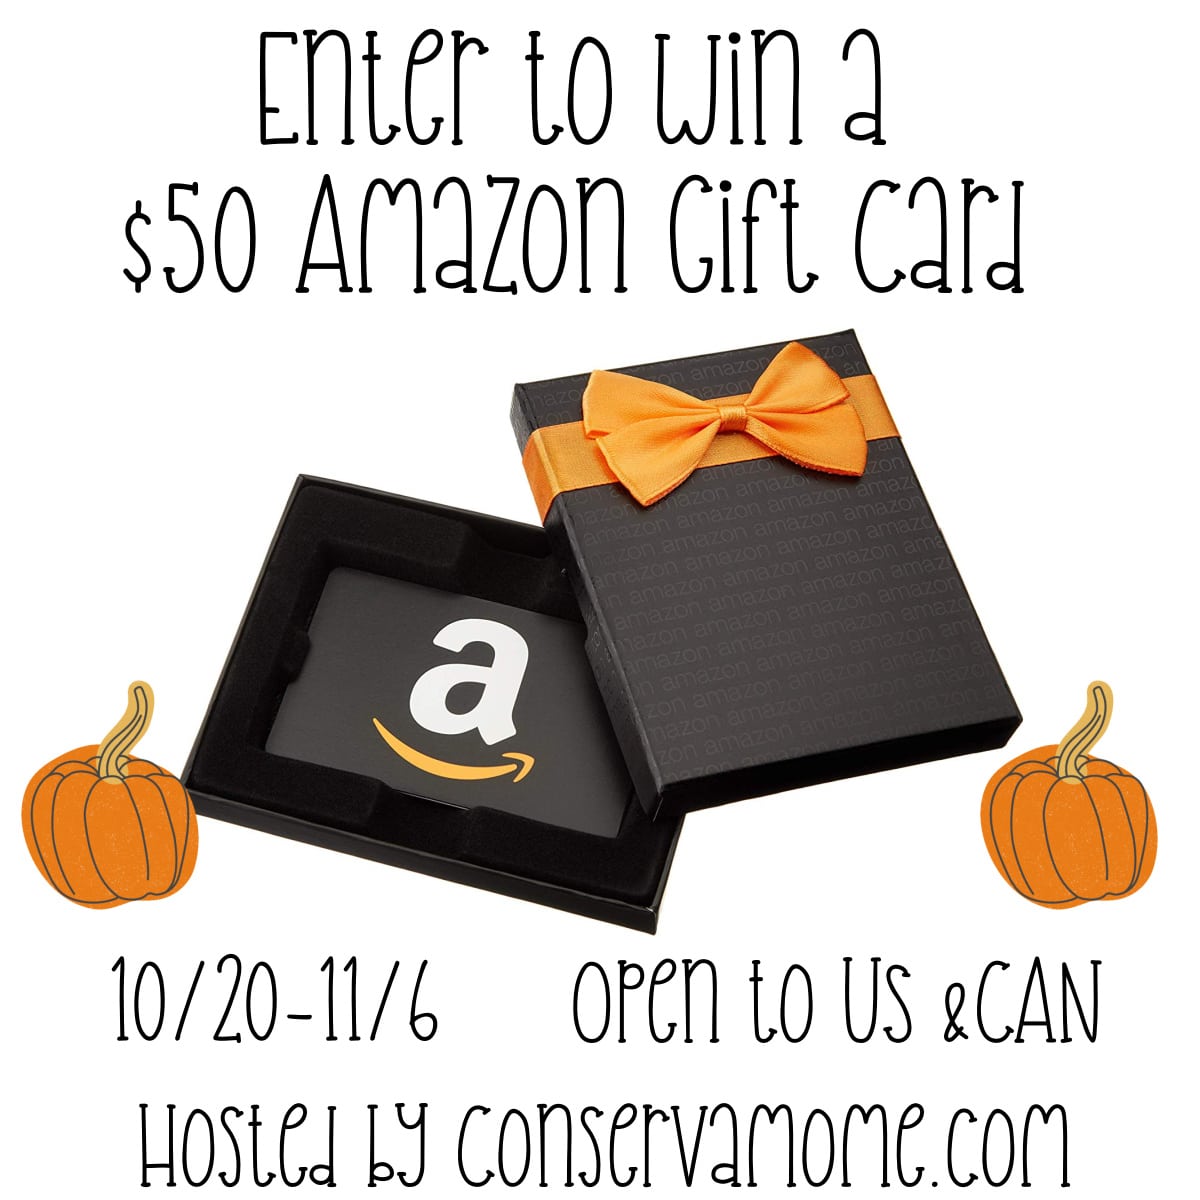 Enter to win a $50 Amazon Gift Card